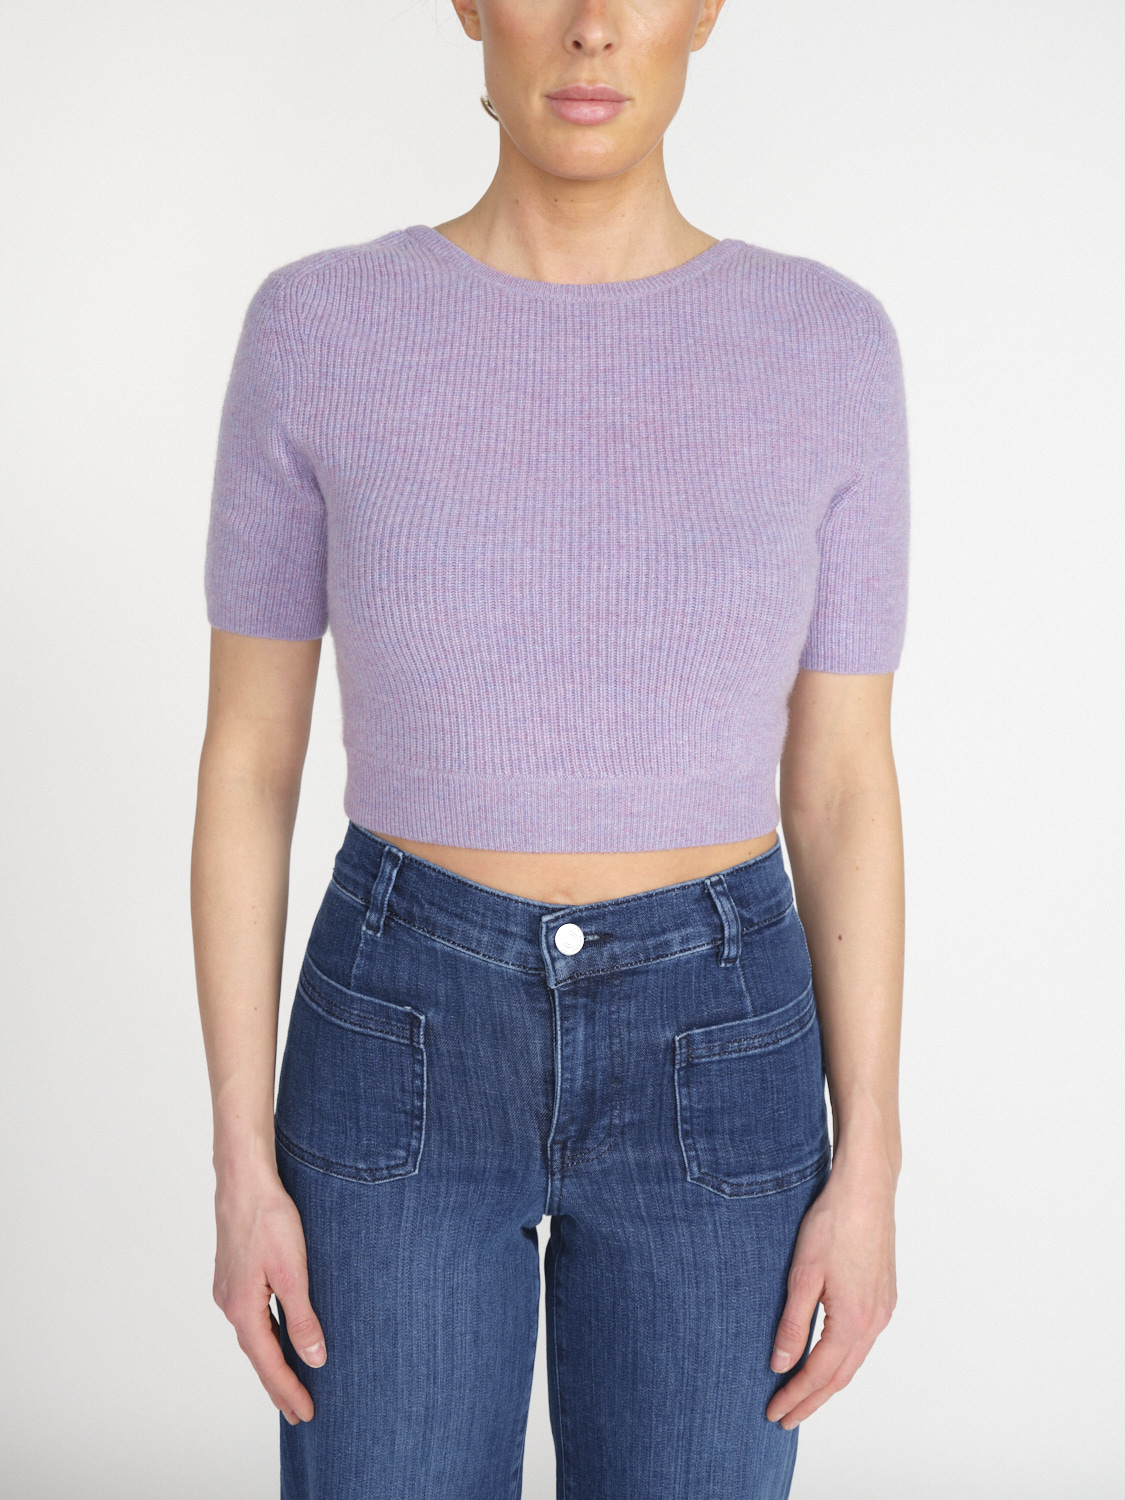 Josefina - Short-sleeved cashmere sweater with cut-out at the back 